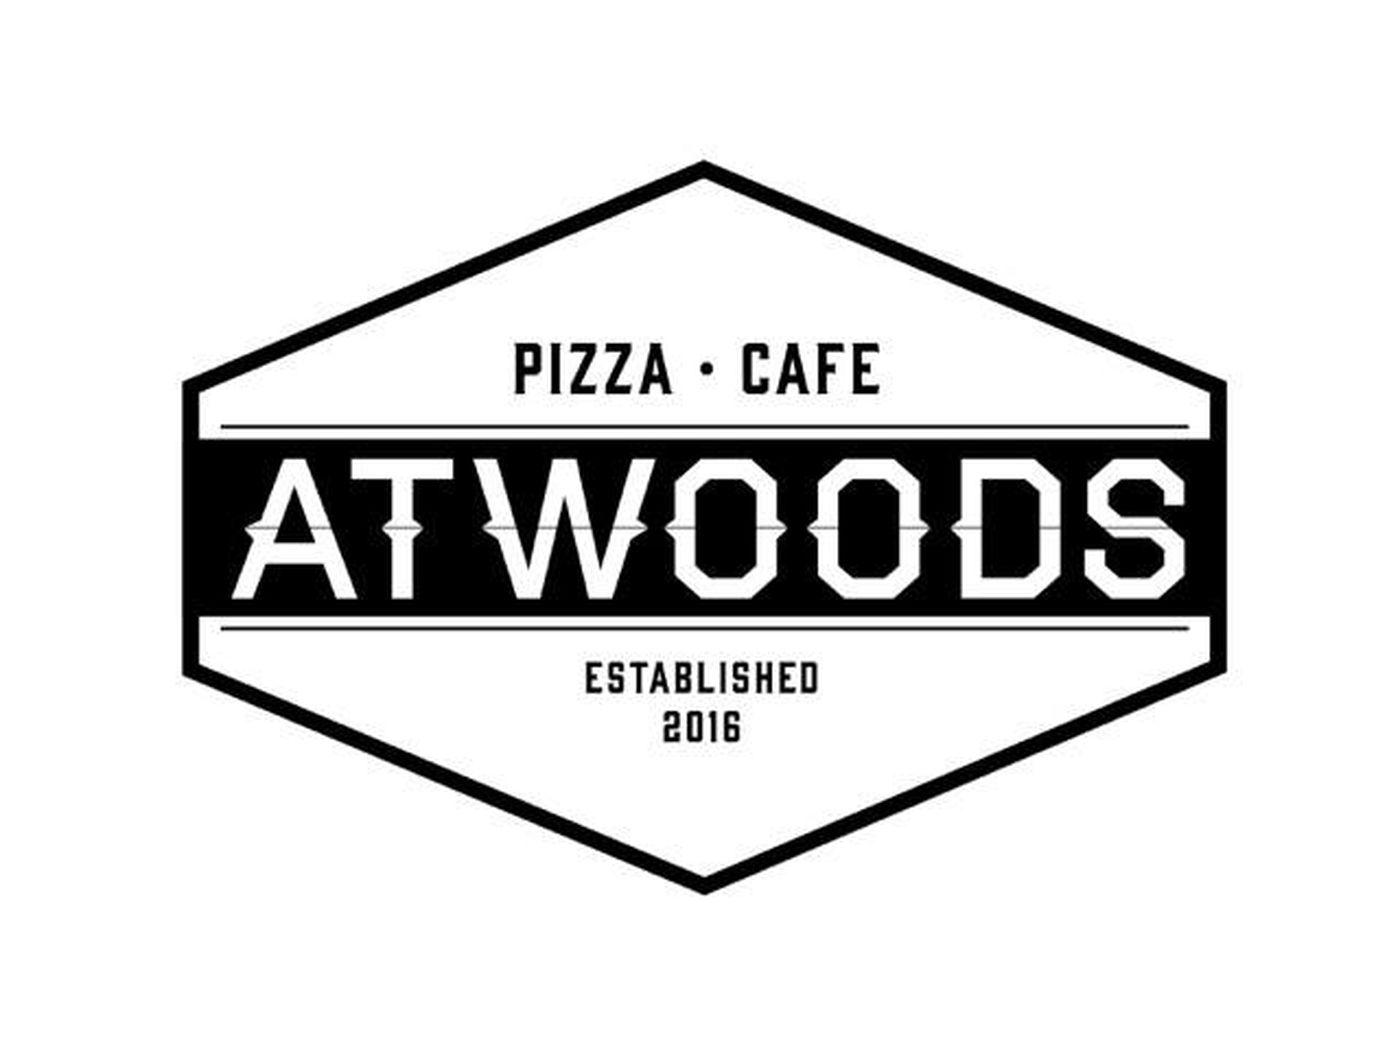 Atwoods Logo - Billy Streck's Atwoods Pizza Cafe Is Open; Here's the Menu